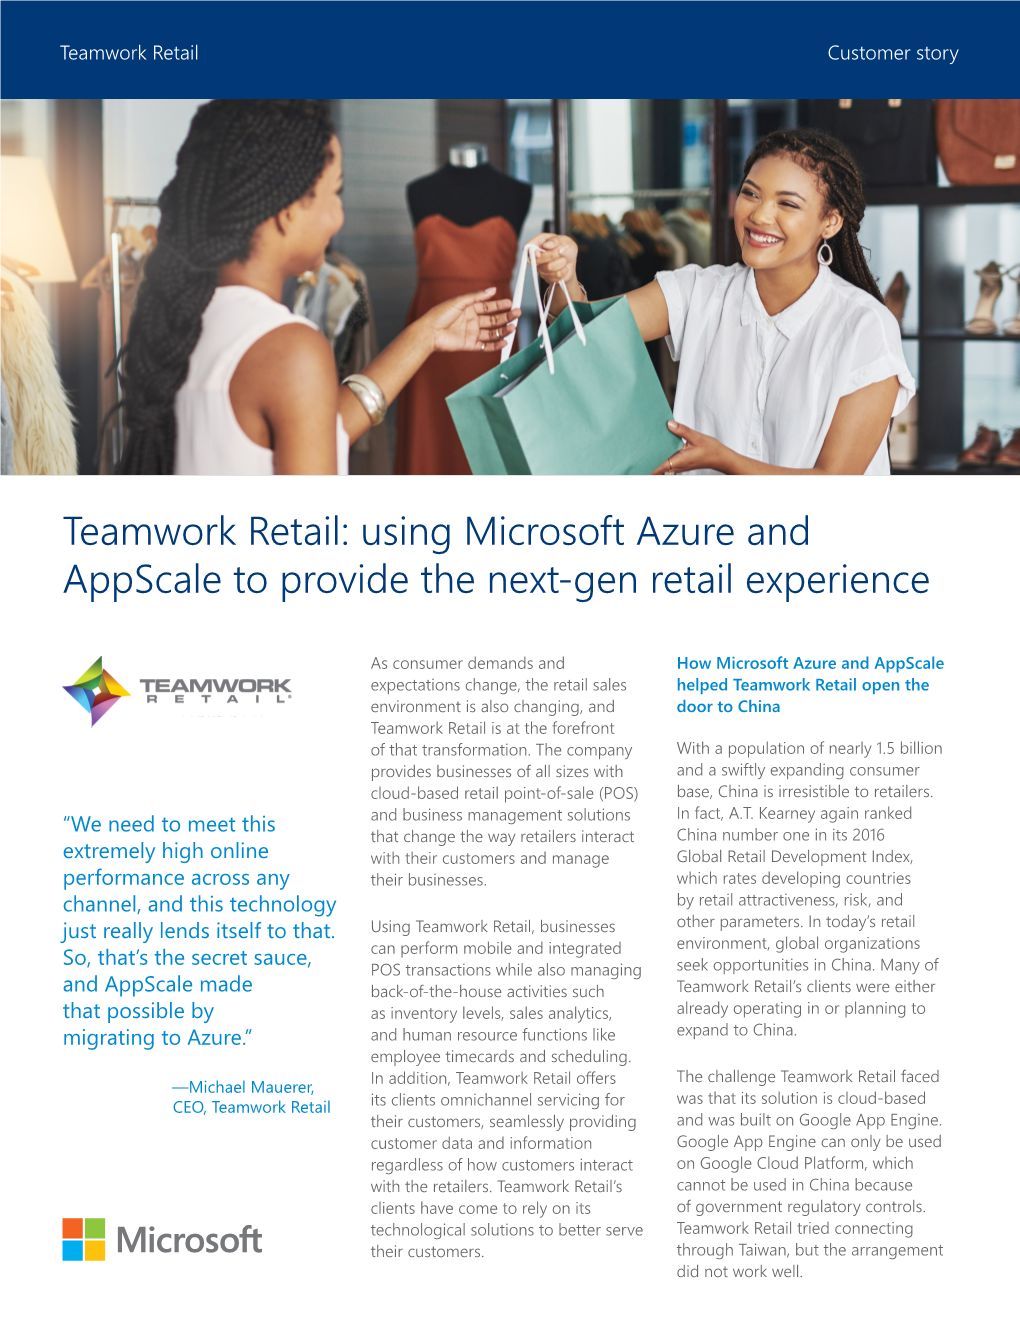 Teamwork Retail: Using Microsoft Azure and Appscale to Provide the Next-Gen Retail Experience